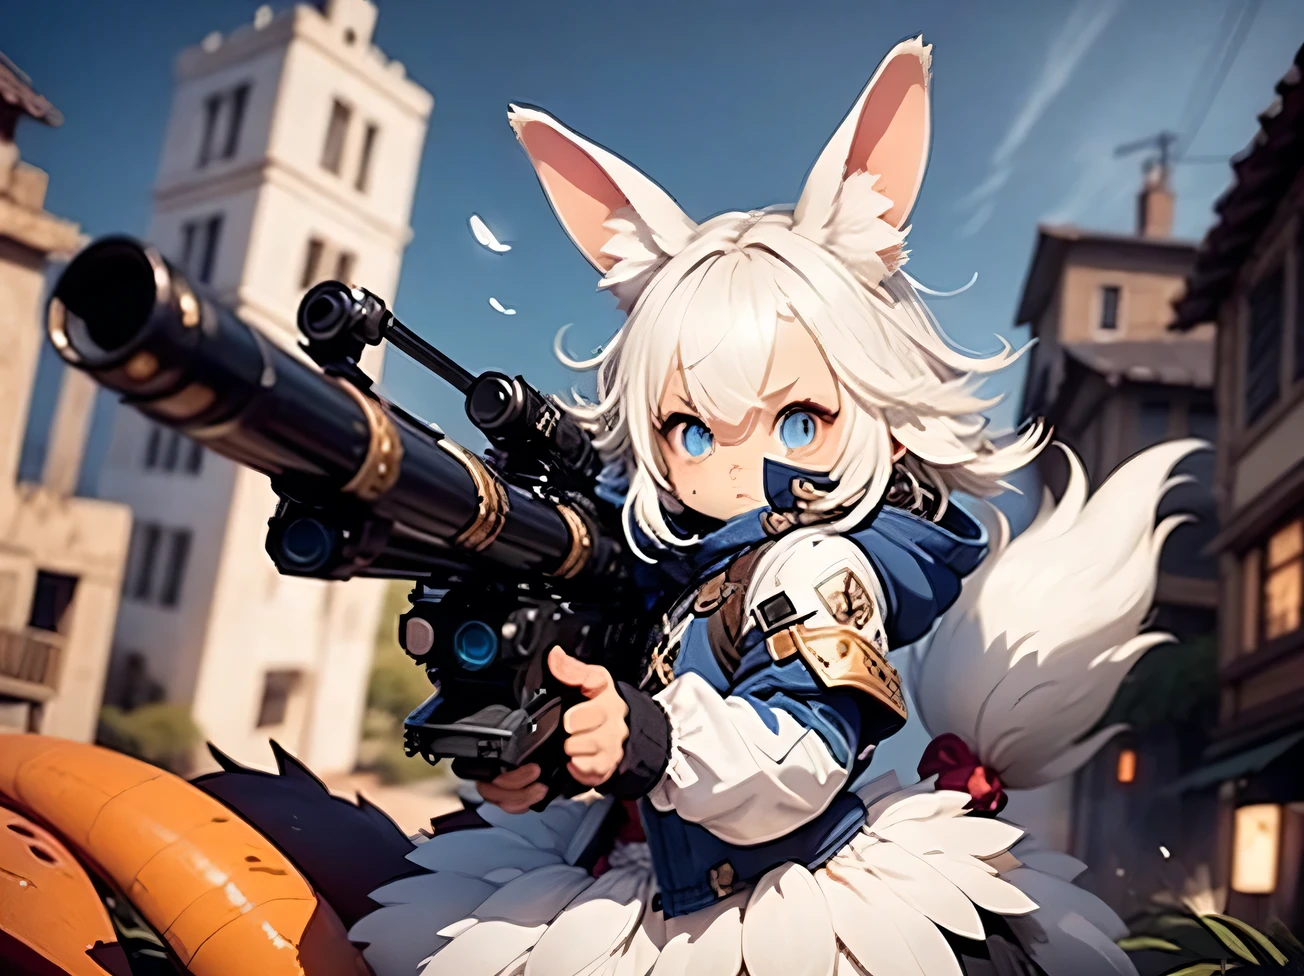 solo,1female\((chibi:1.8),cute,kawaii,small kid,(white hair:1.7),(very long hair:1.7),bangs,(ear\(fluffy white rabbit-ear\):1.3),(only 1small rabbit-tail at hip:1.2),(red eye),big eye,beautiful shiny eye,skin color white,big hairbow,(combat suit\(body suit,(very tight:1.5),weapons\)),breast,shooting and aiming a laser gun to giant monster cat\), BREAK ,background\(city of Rubble,giant cats are destroying the city\),(close up female), BREAK ,quality\(8k,wallpaper of extremely detailed CG unit, ​masterpiece,hight resolution,top-quality,top-quality real texture skin,hyper realisitic,increase the resolution,RAW photos,best qualtiy,highly detailed,the wallpaper,golden ratio\)